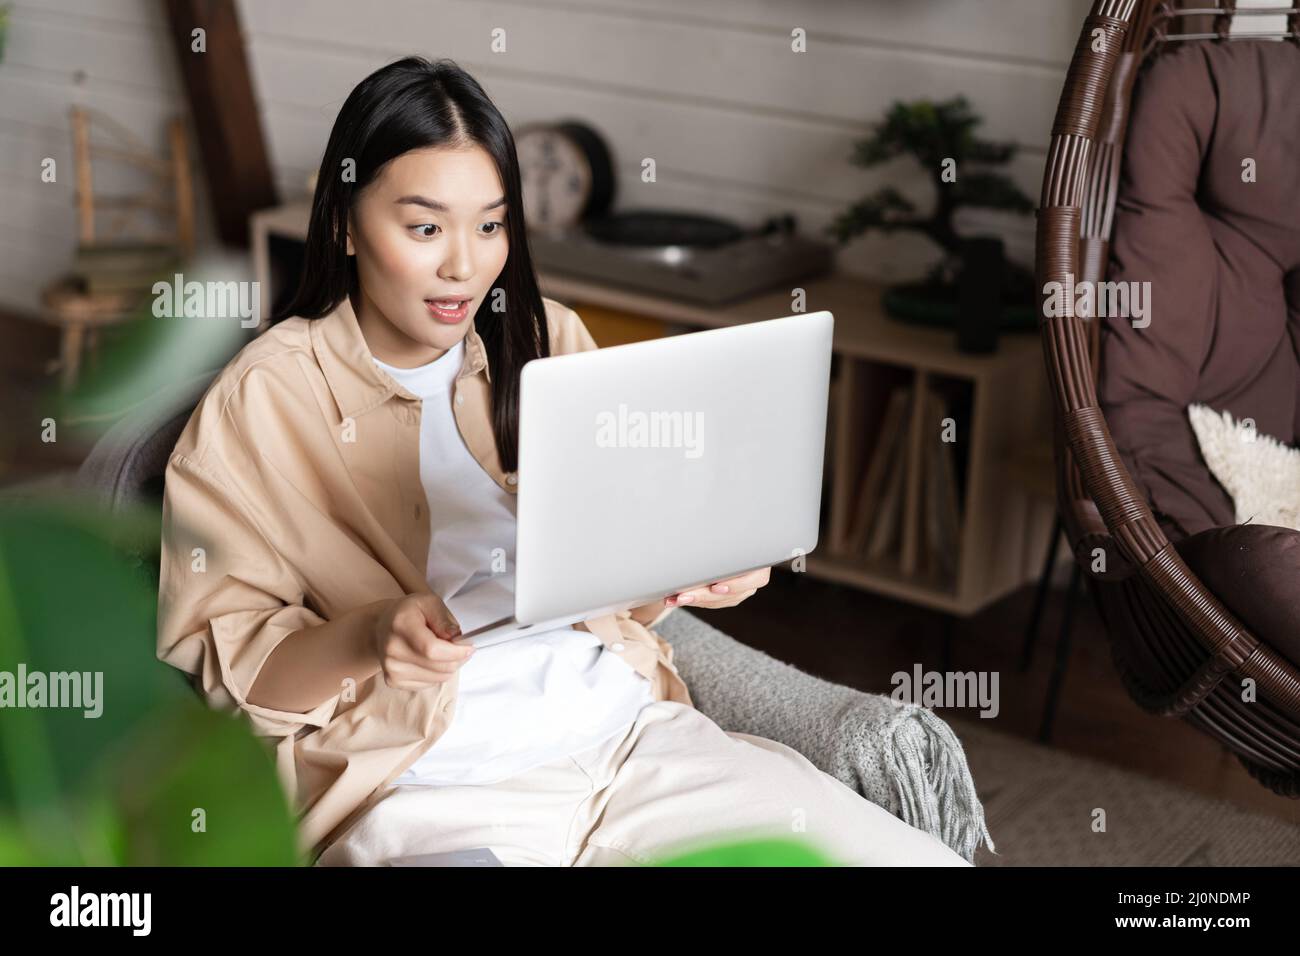 Asian woman looks excited and amazed at laptop screen, winning online, sitting at home Stock Photo